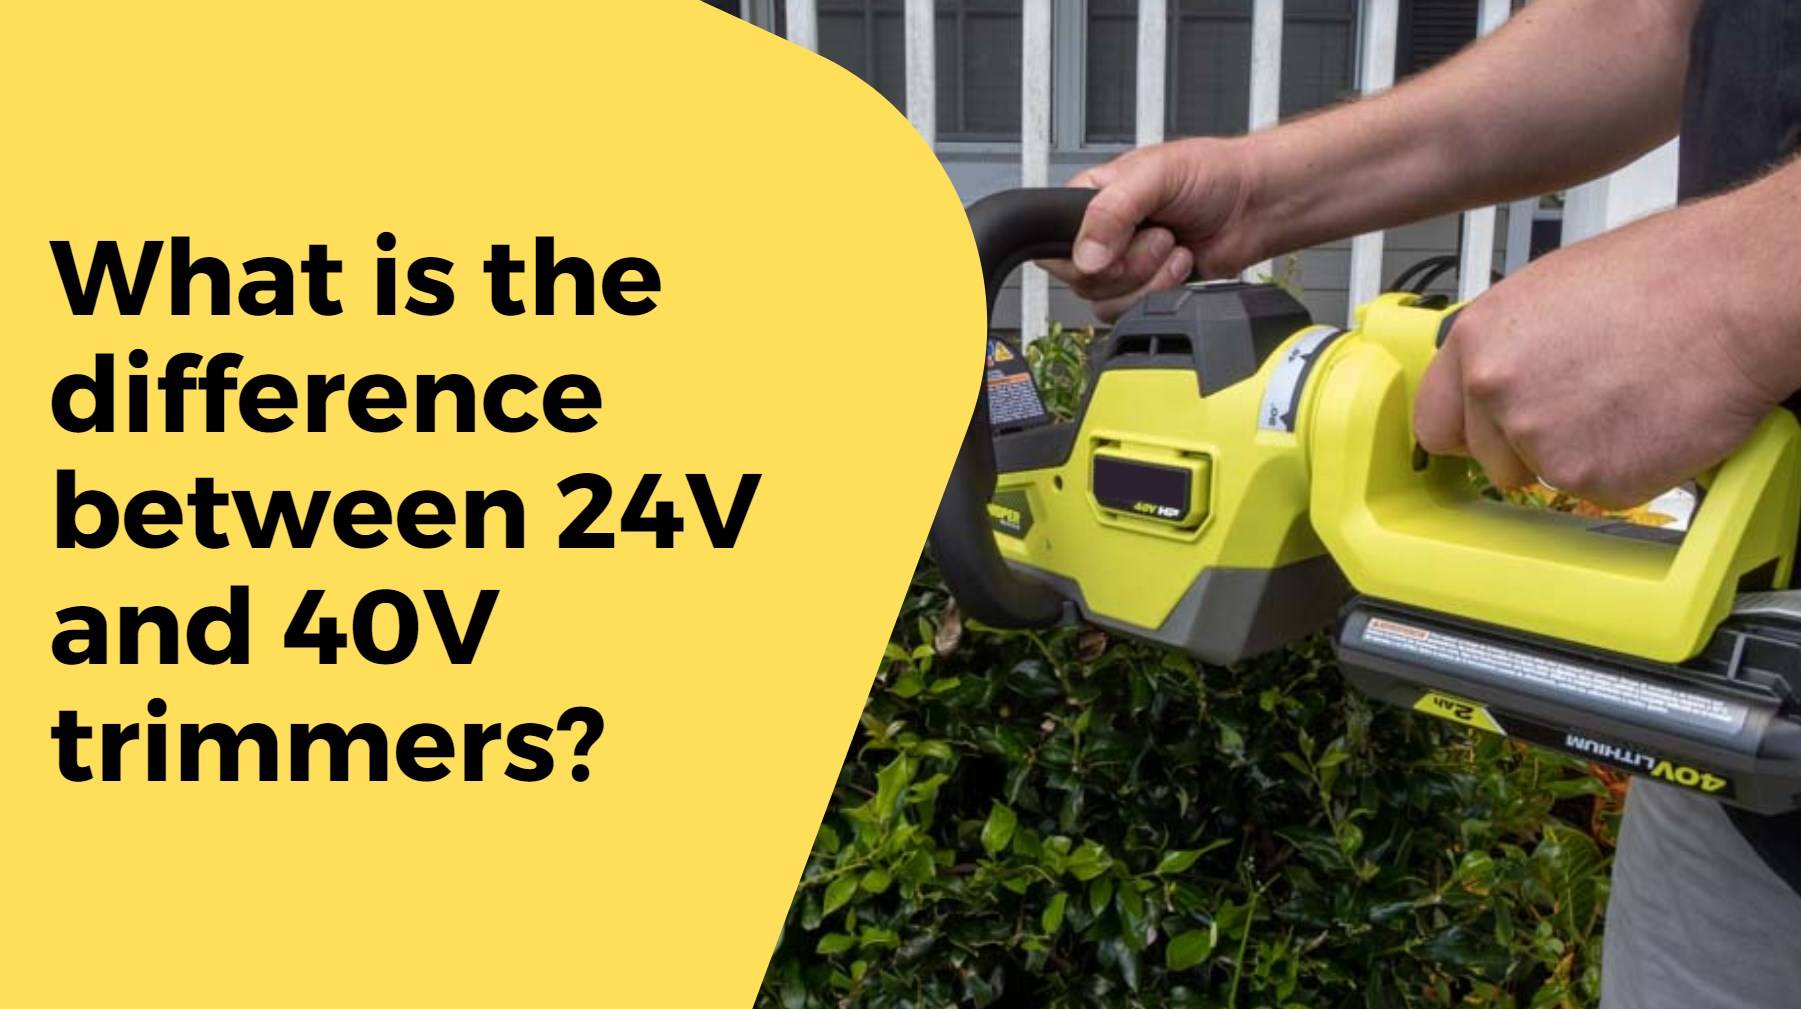 What is the difference between 24V and 40V trimmers?